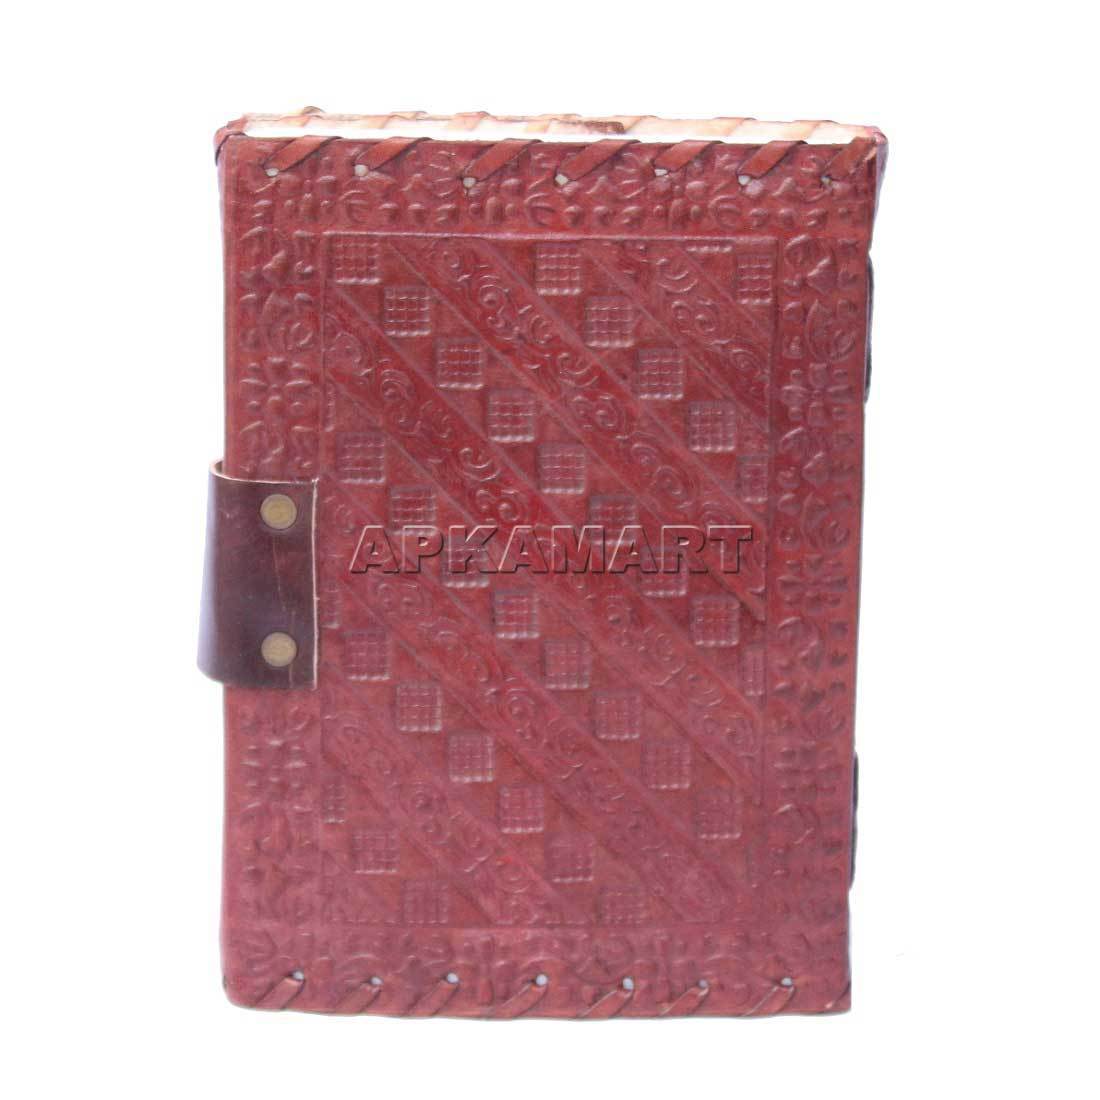 Antique Travel Diary | Leather Notebook for Work - 6 inch - ApkaMart